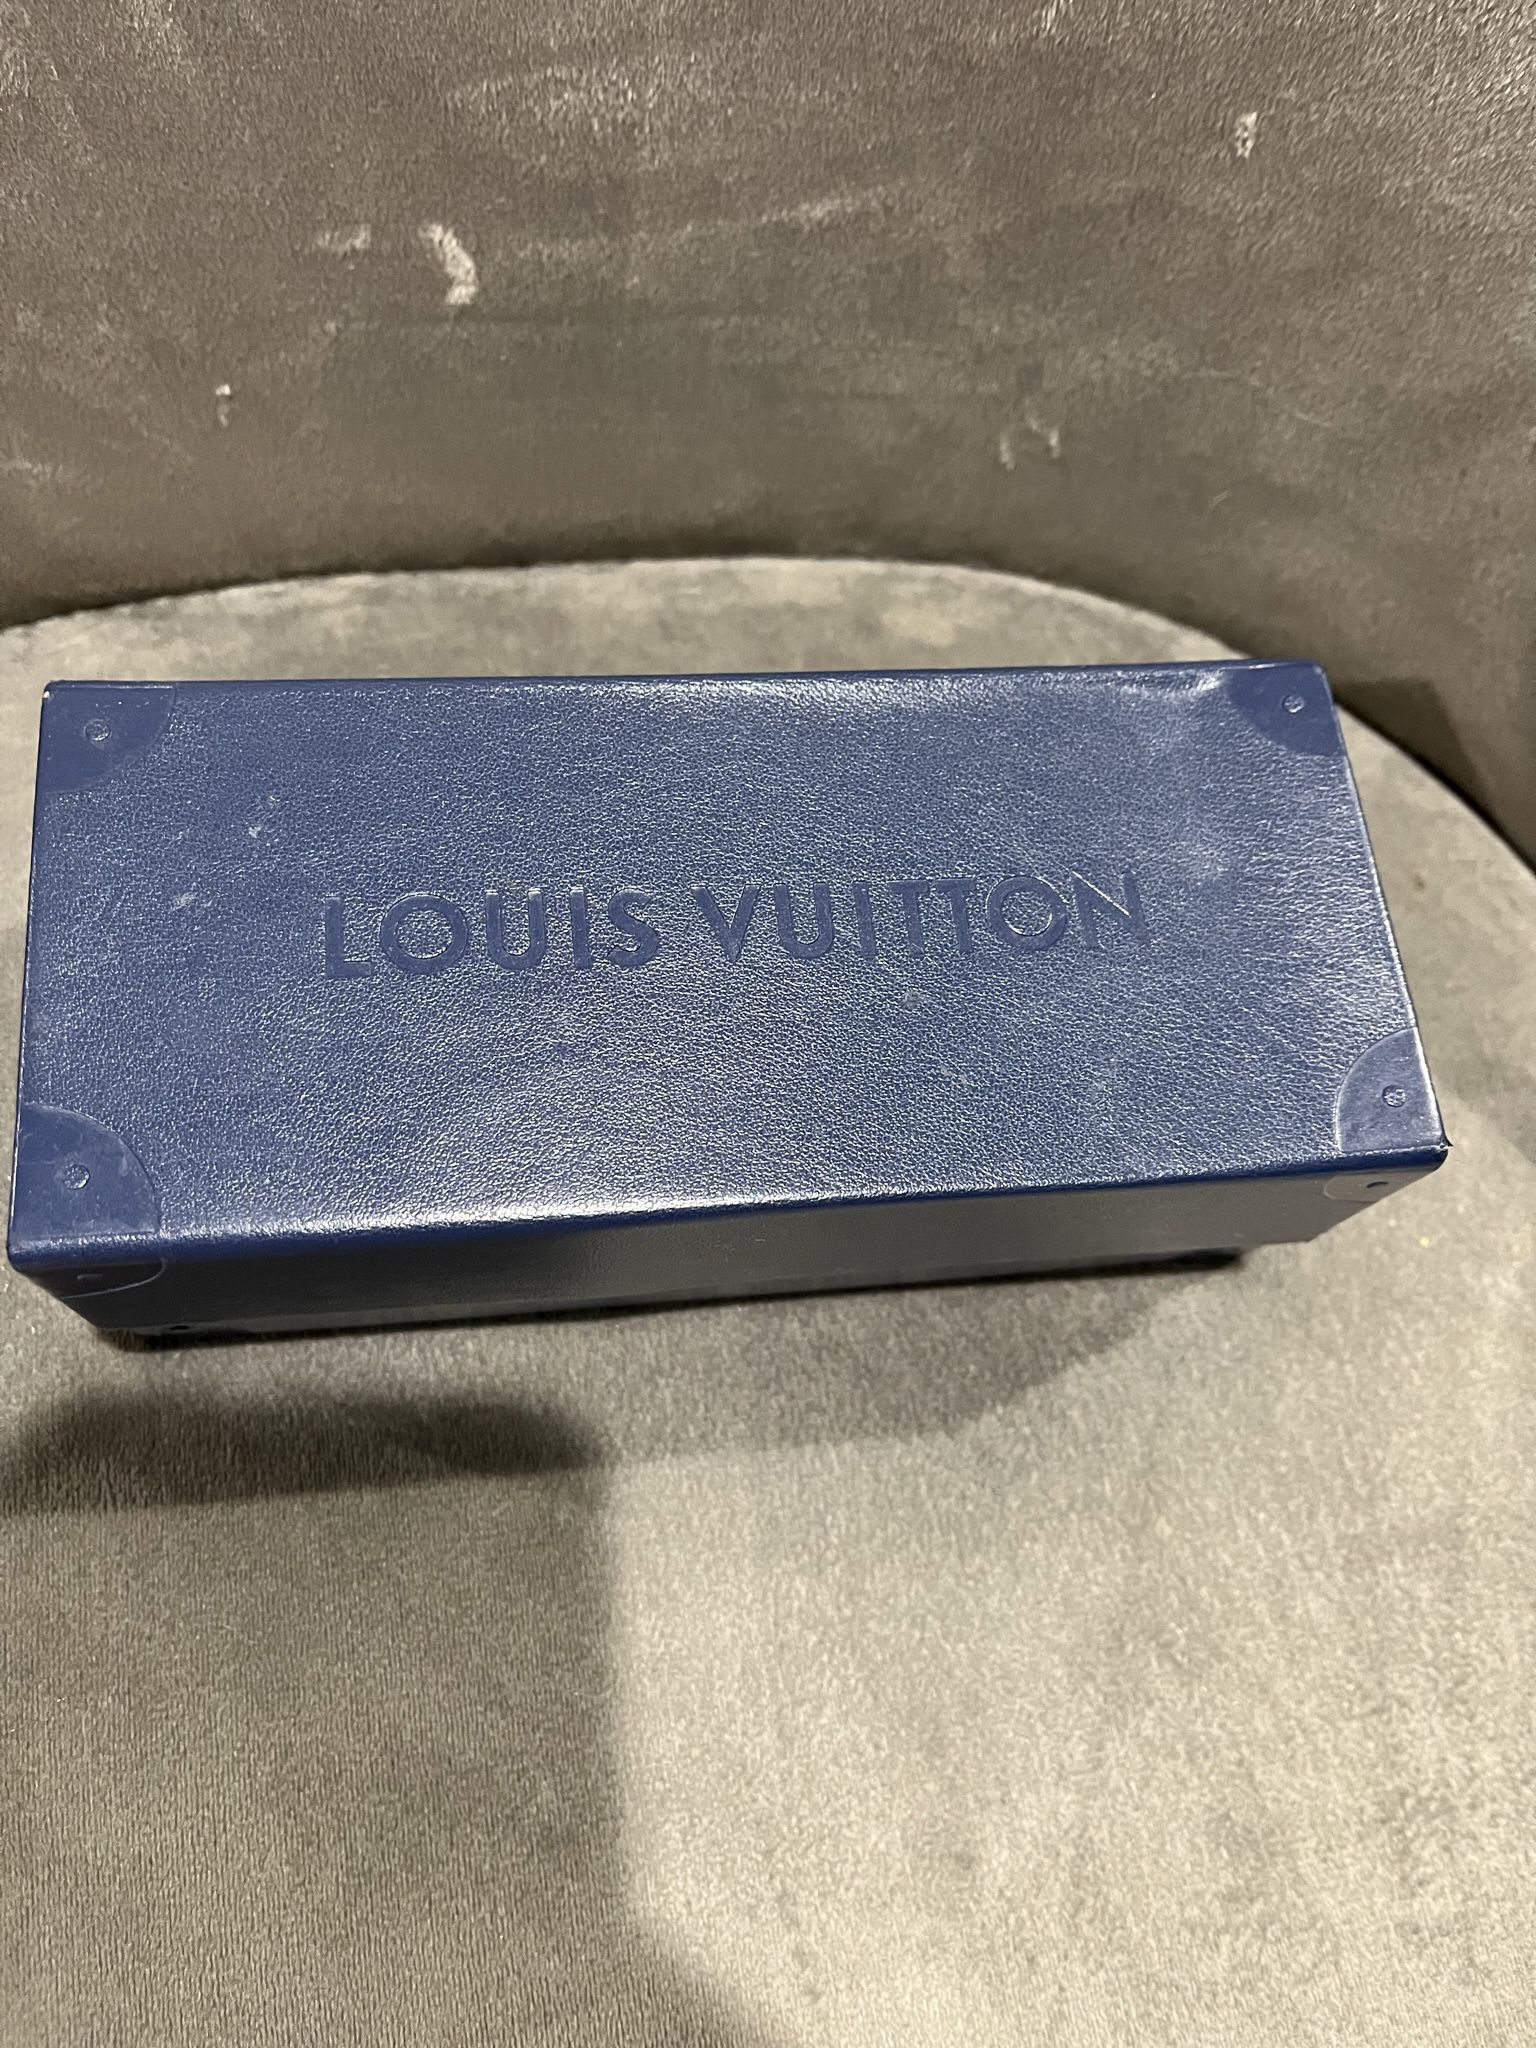 Louis Vuitton Cyclone Sunglasses for Sale in Dearborn Heights, MI - OfferUp